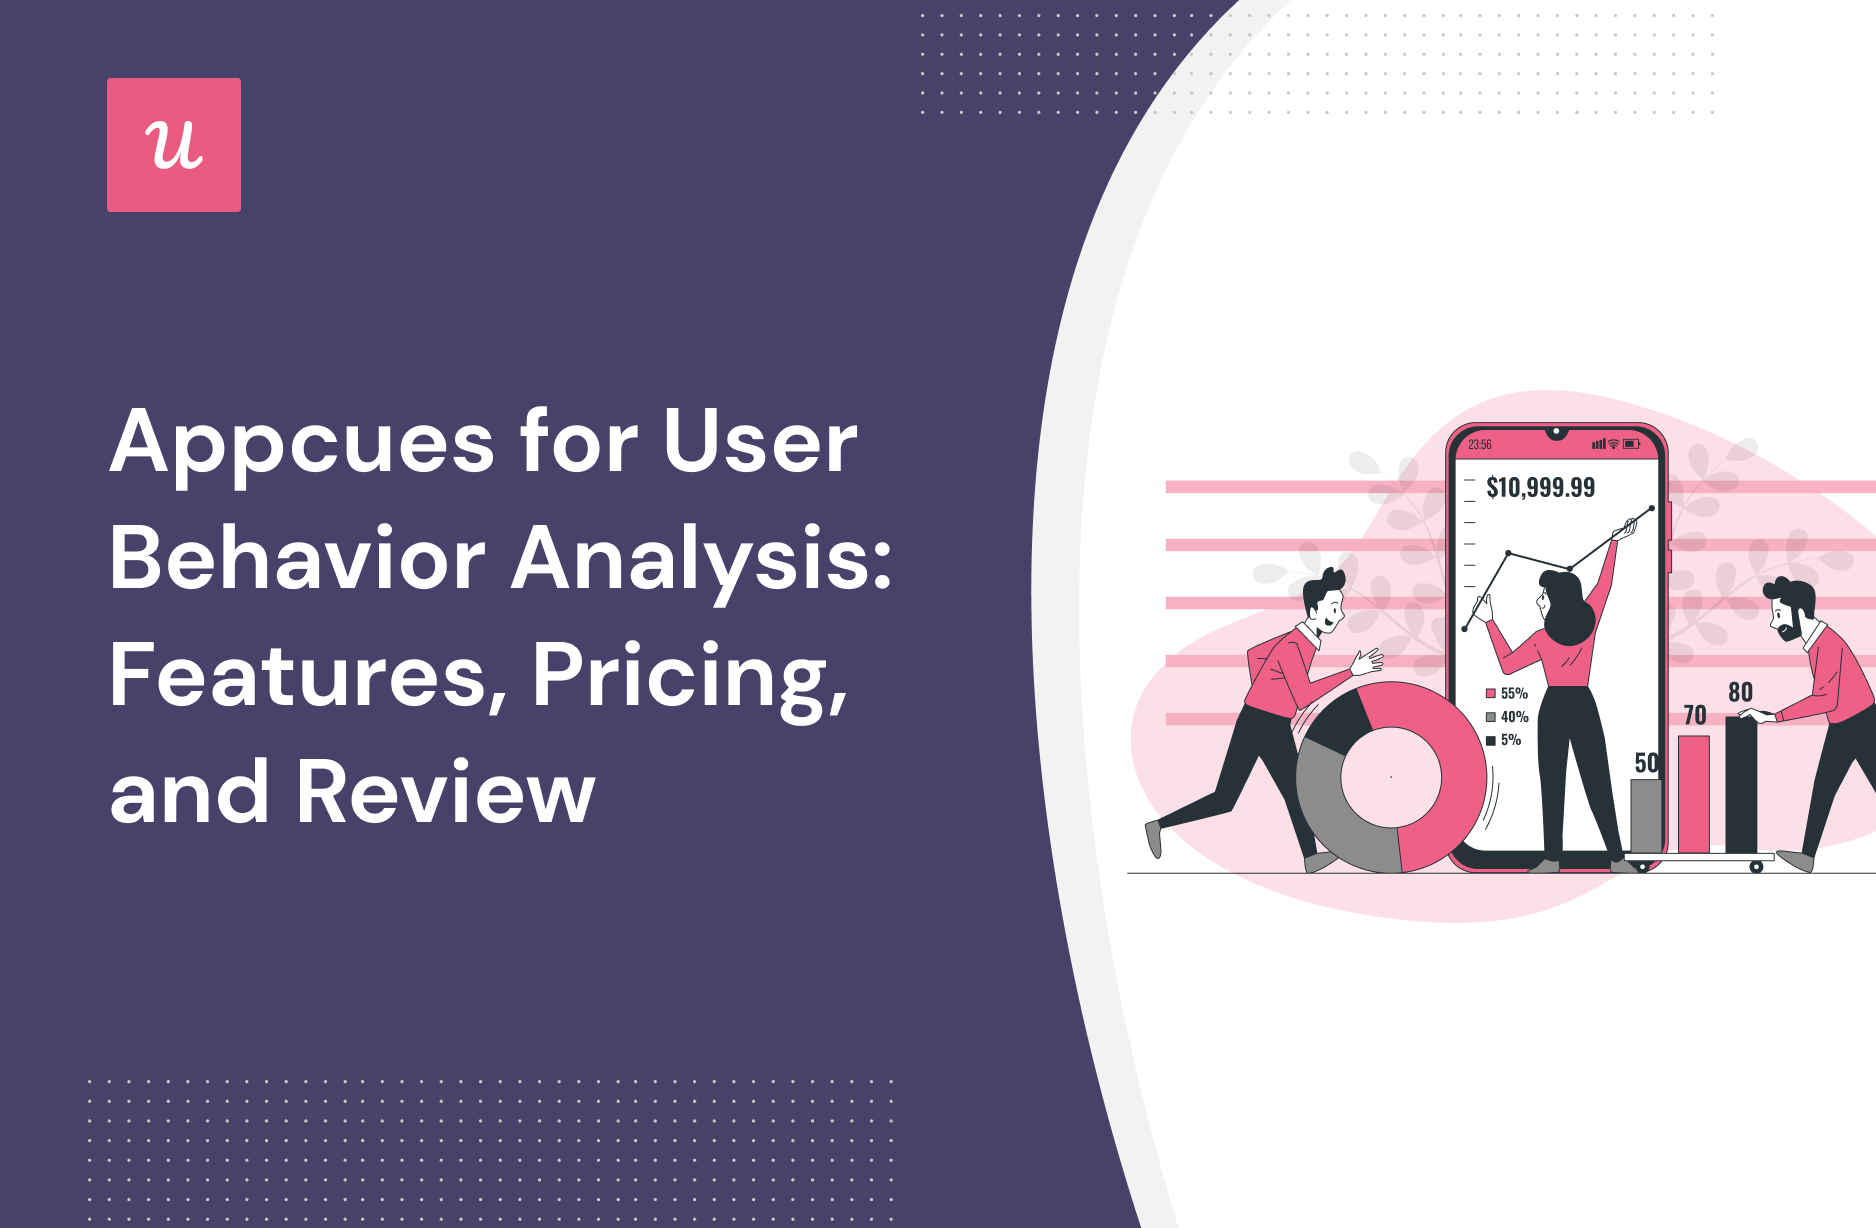 Appcues for User Behavior Analysis: Features, Pricing, and Review